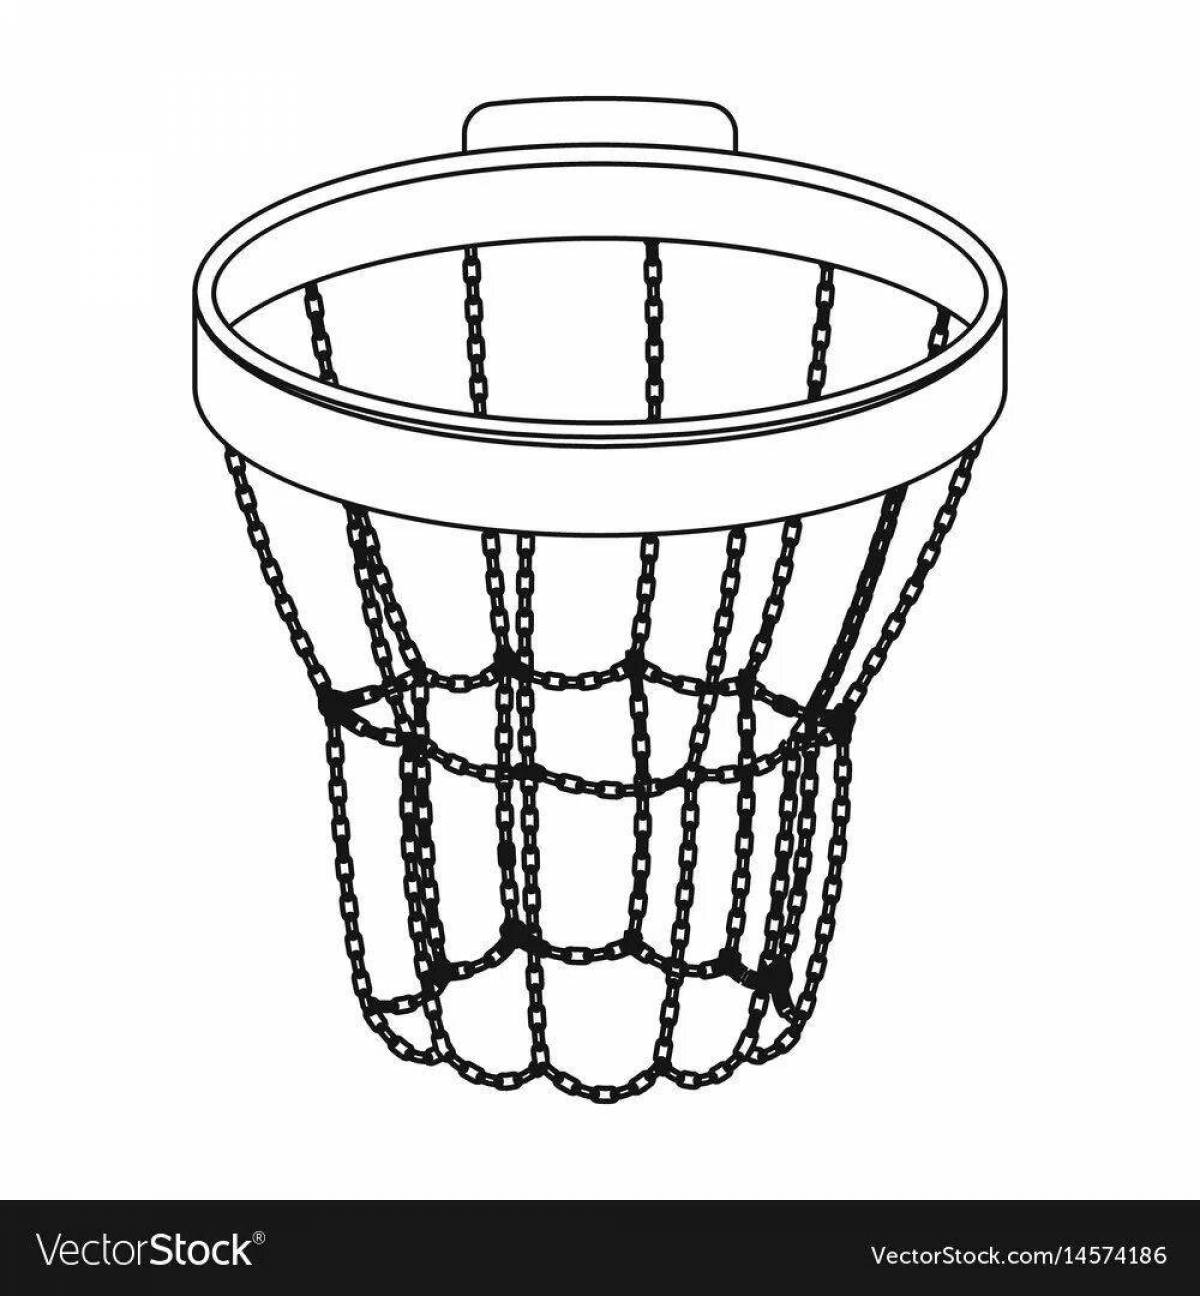 Exciting basketball hoop coloring page